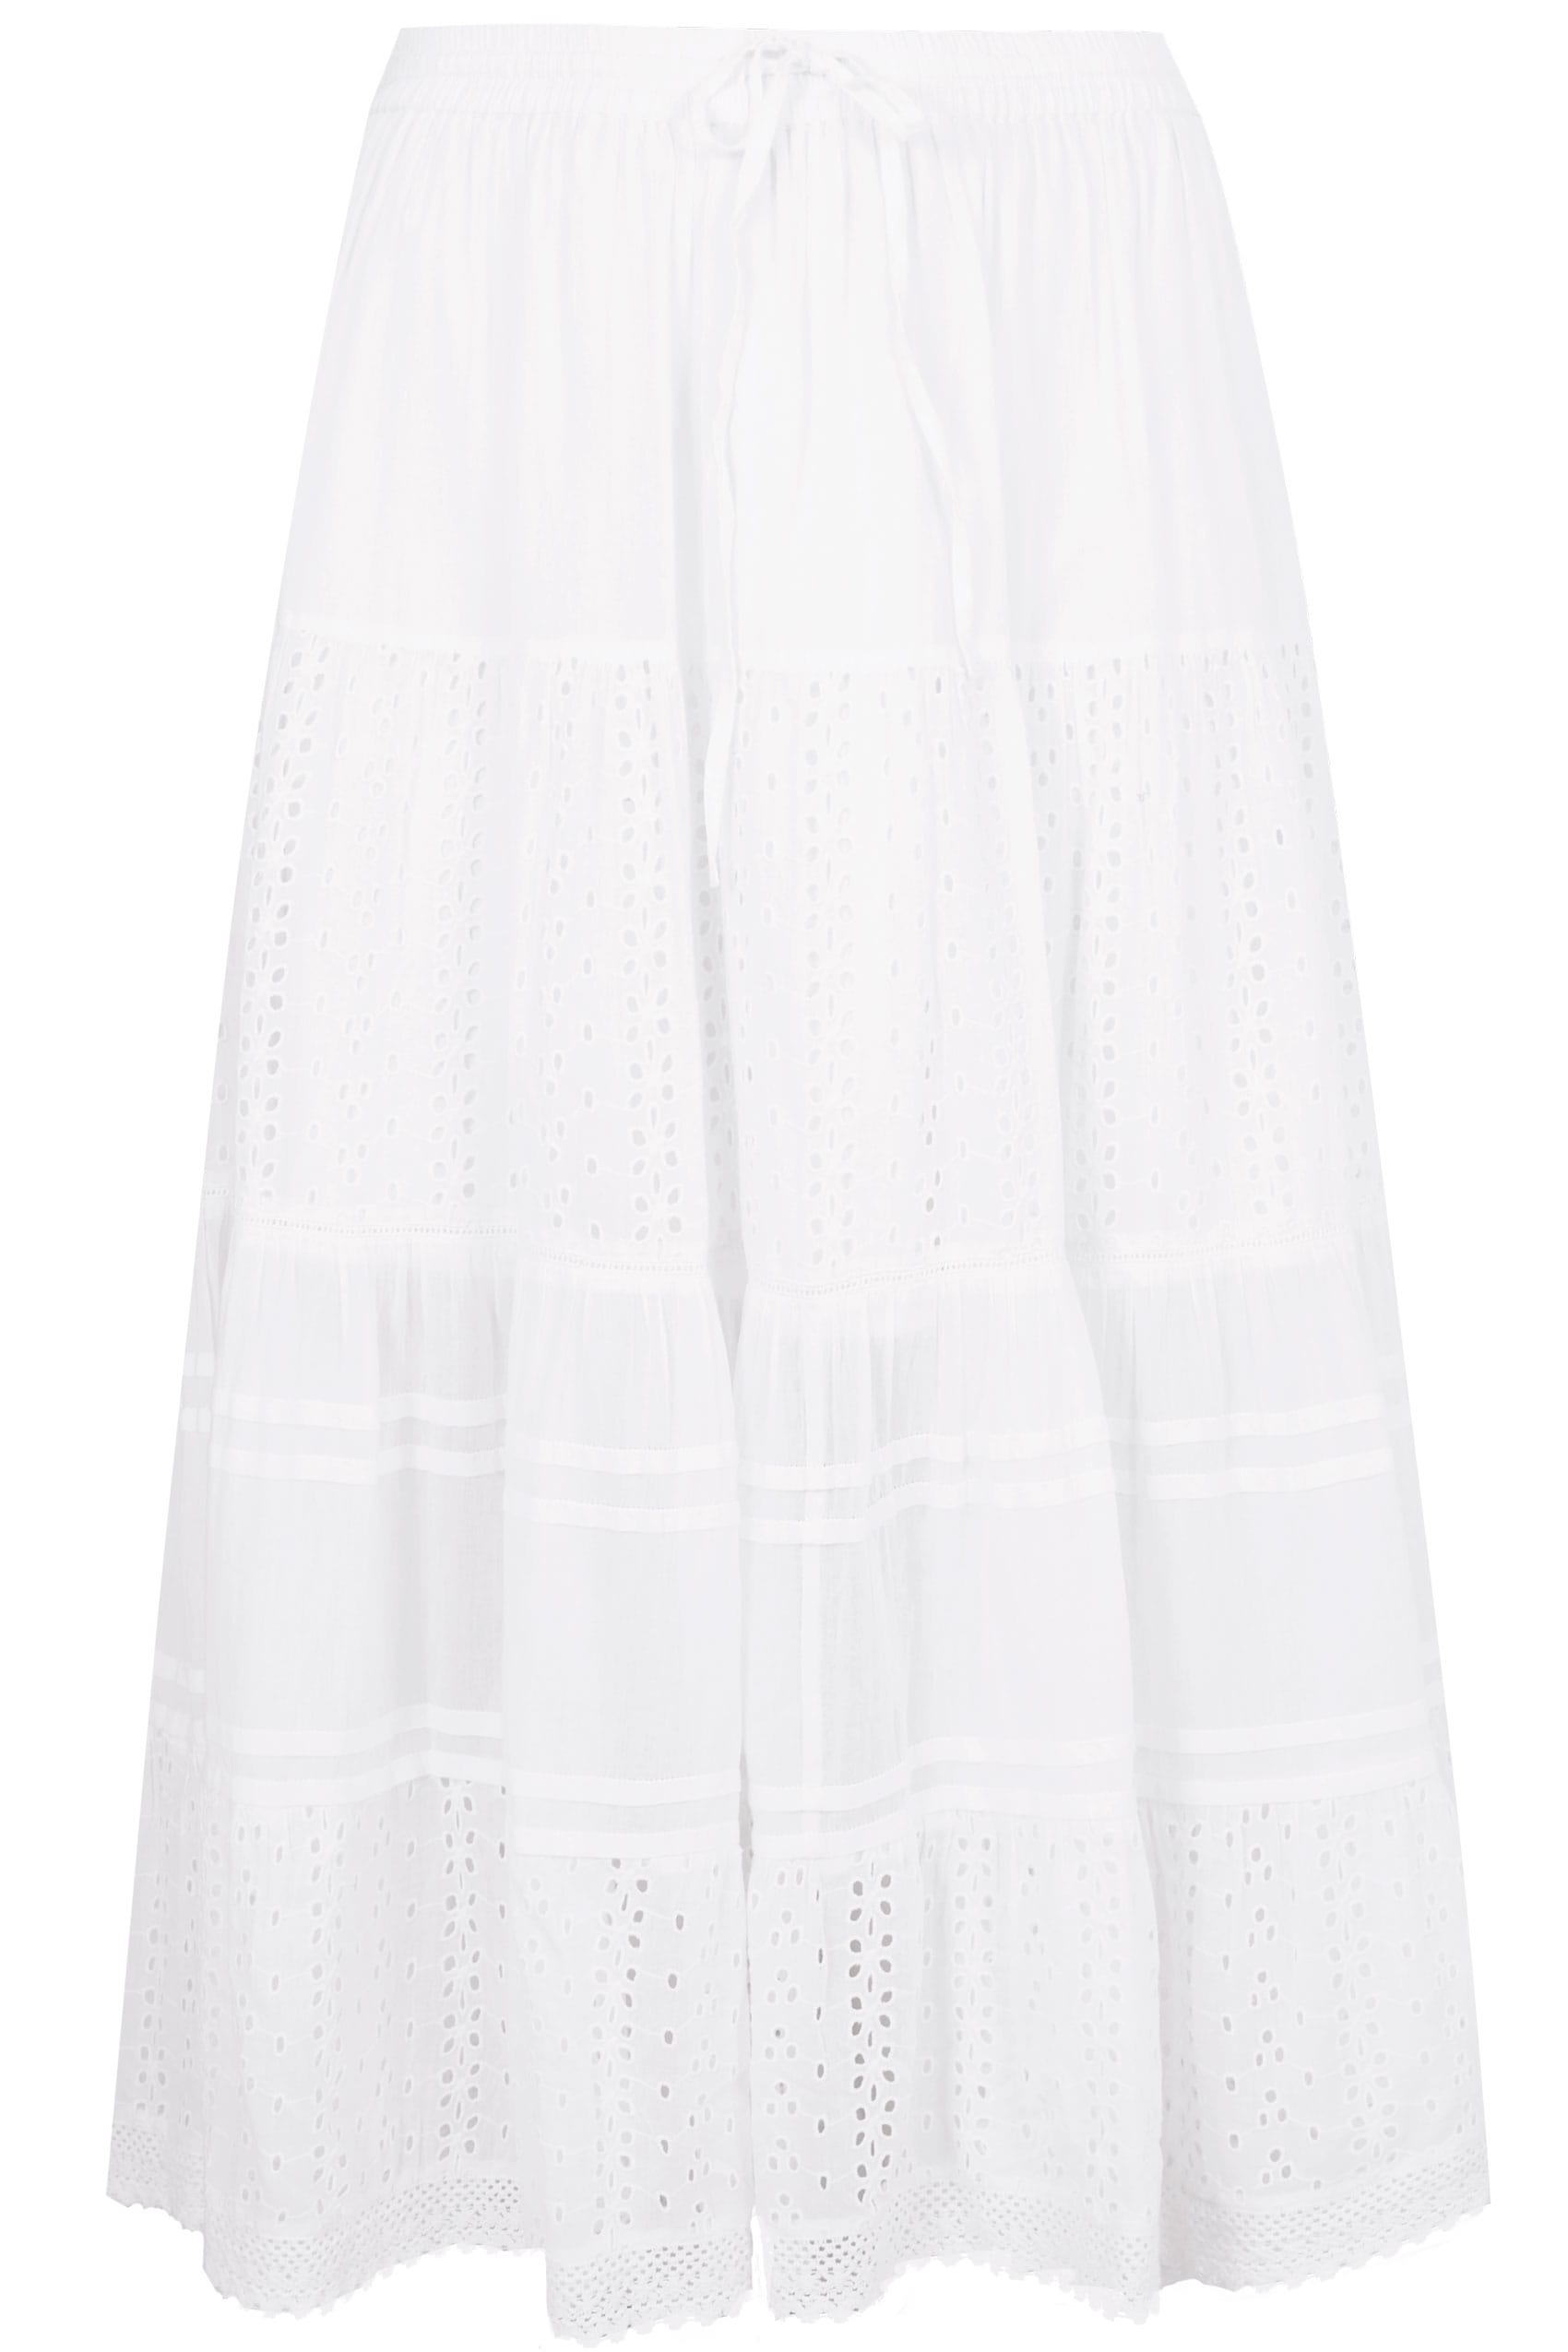 White Tiered Broderie Maxi Skirt, plus size 16 to 36